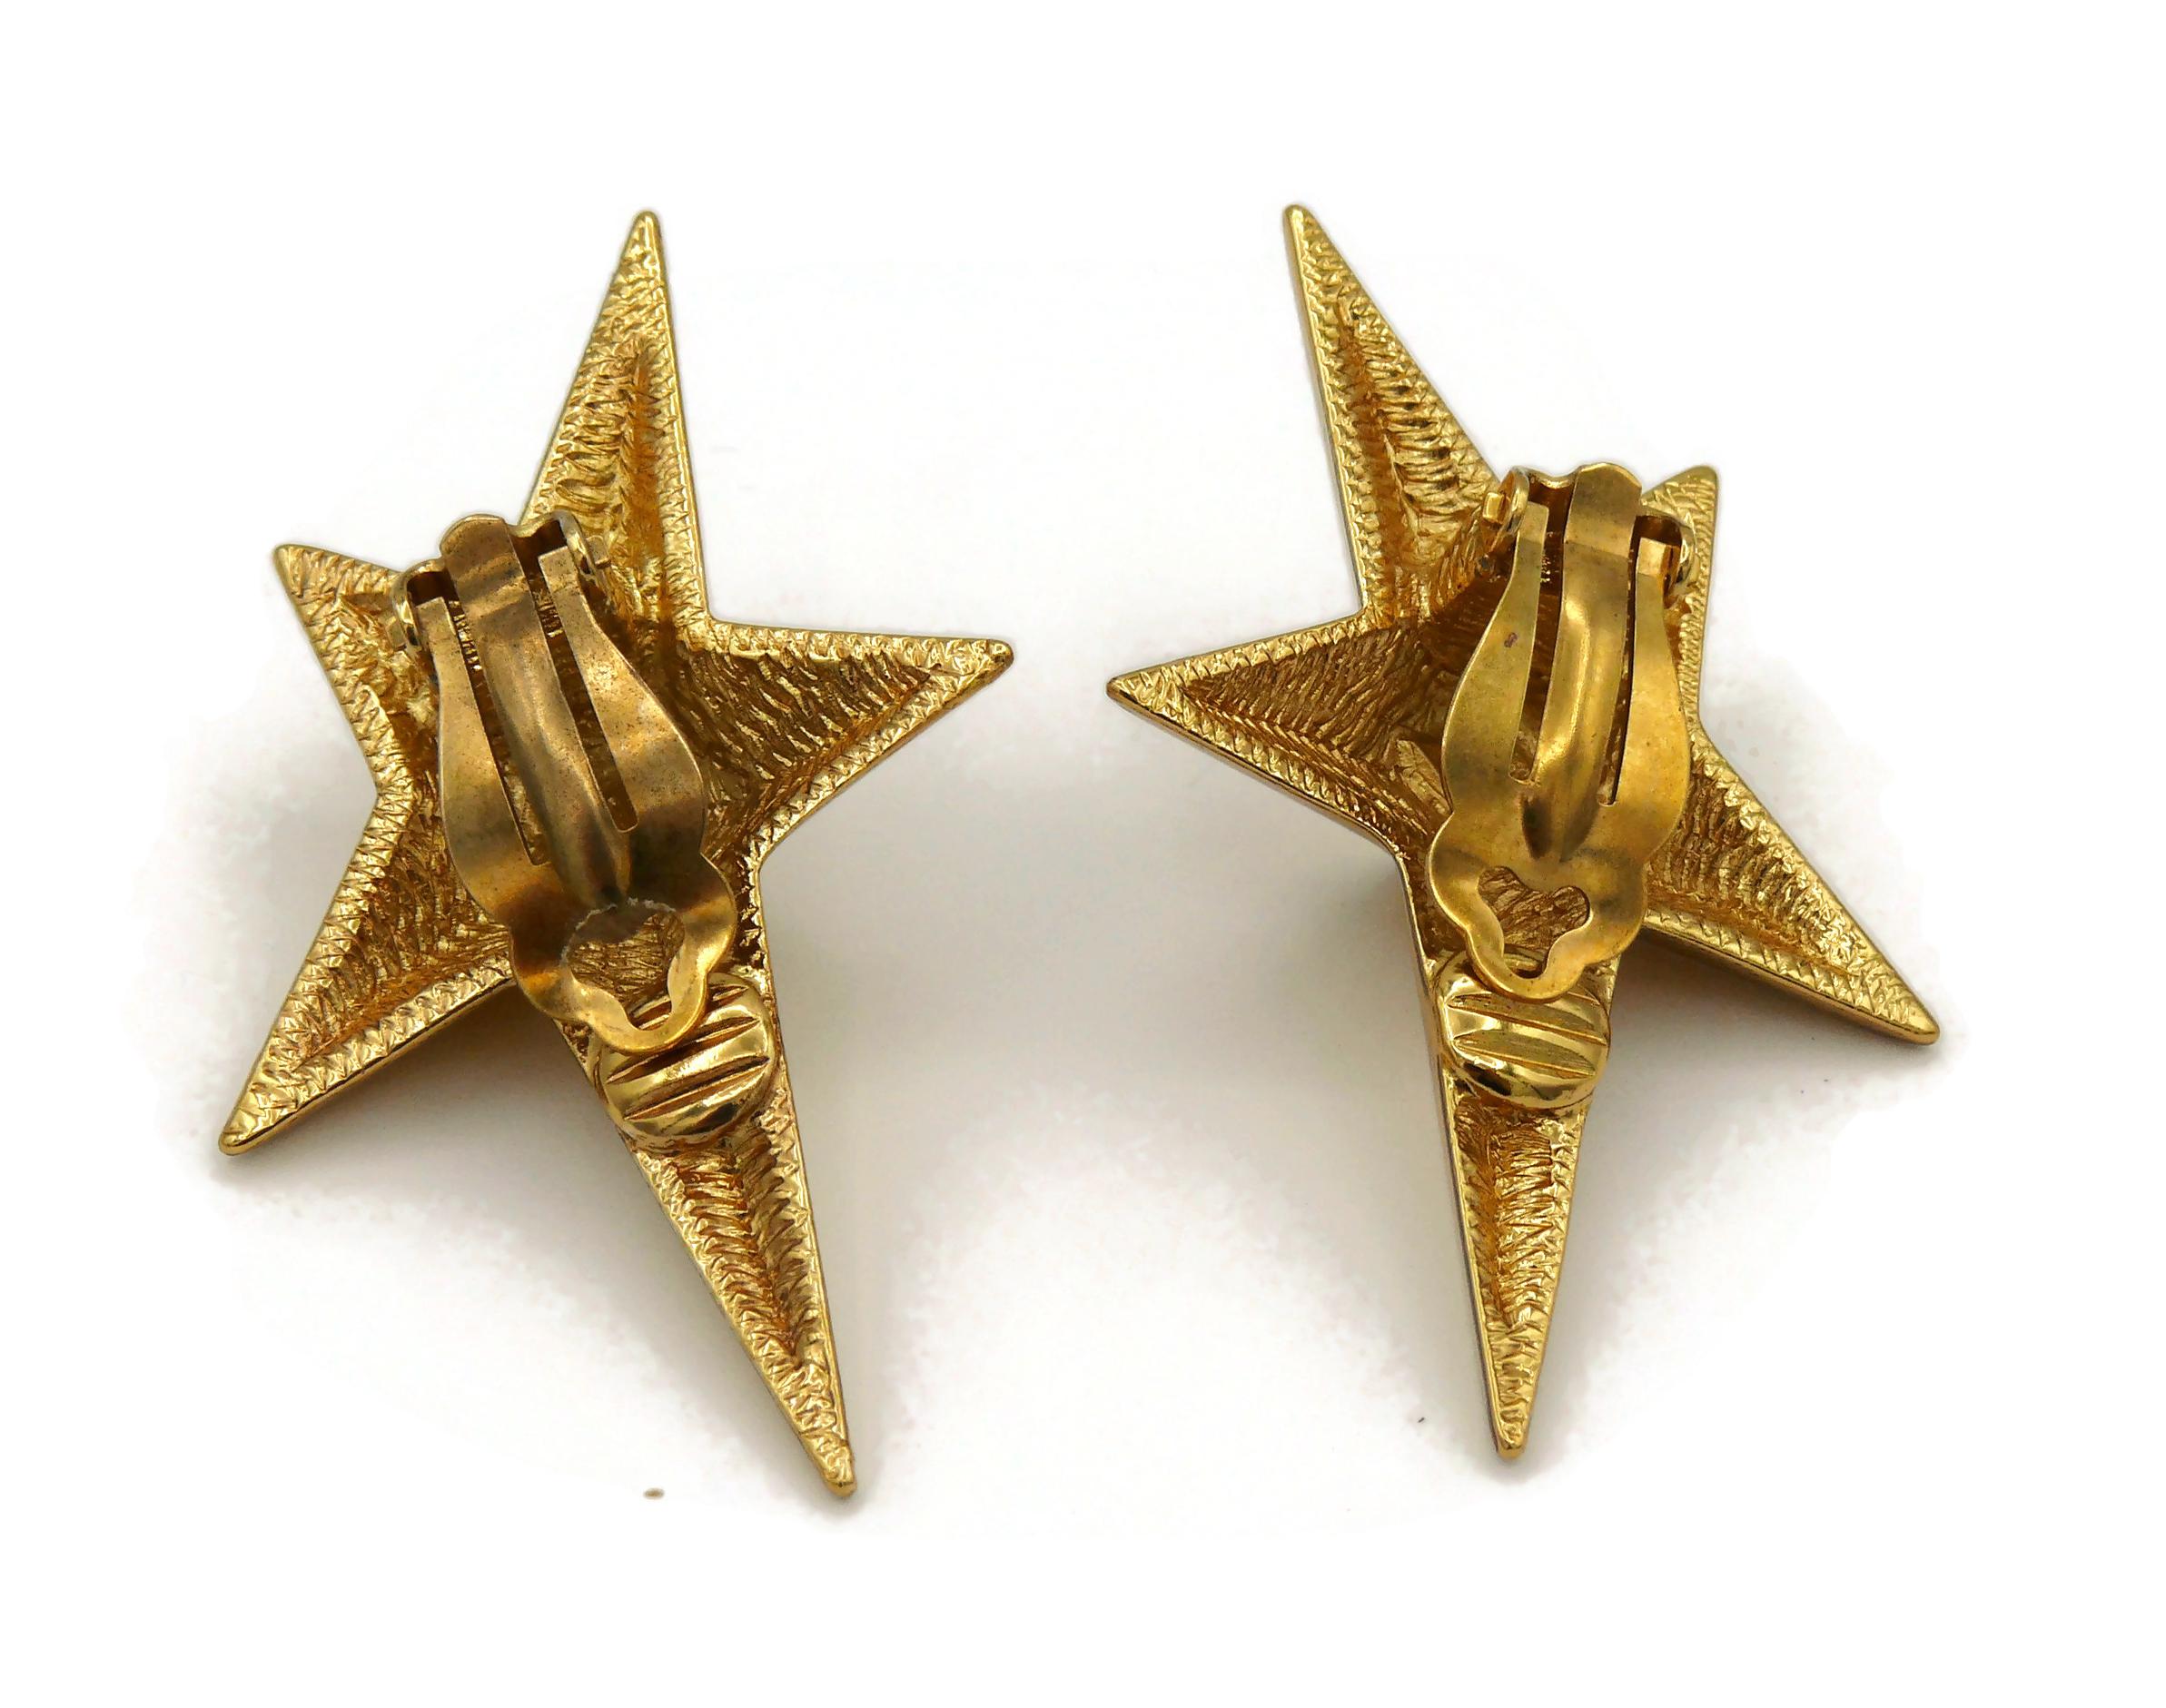 THIERRY MUGLER Vintage Gold Tone Iconic Star Clip-On Earrings 3